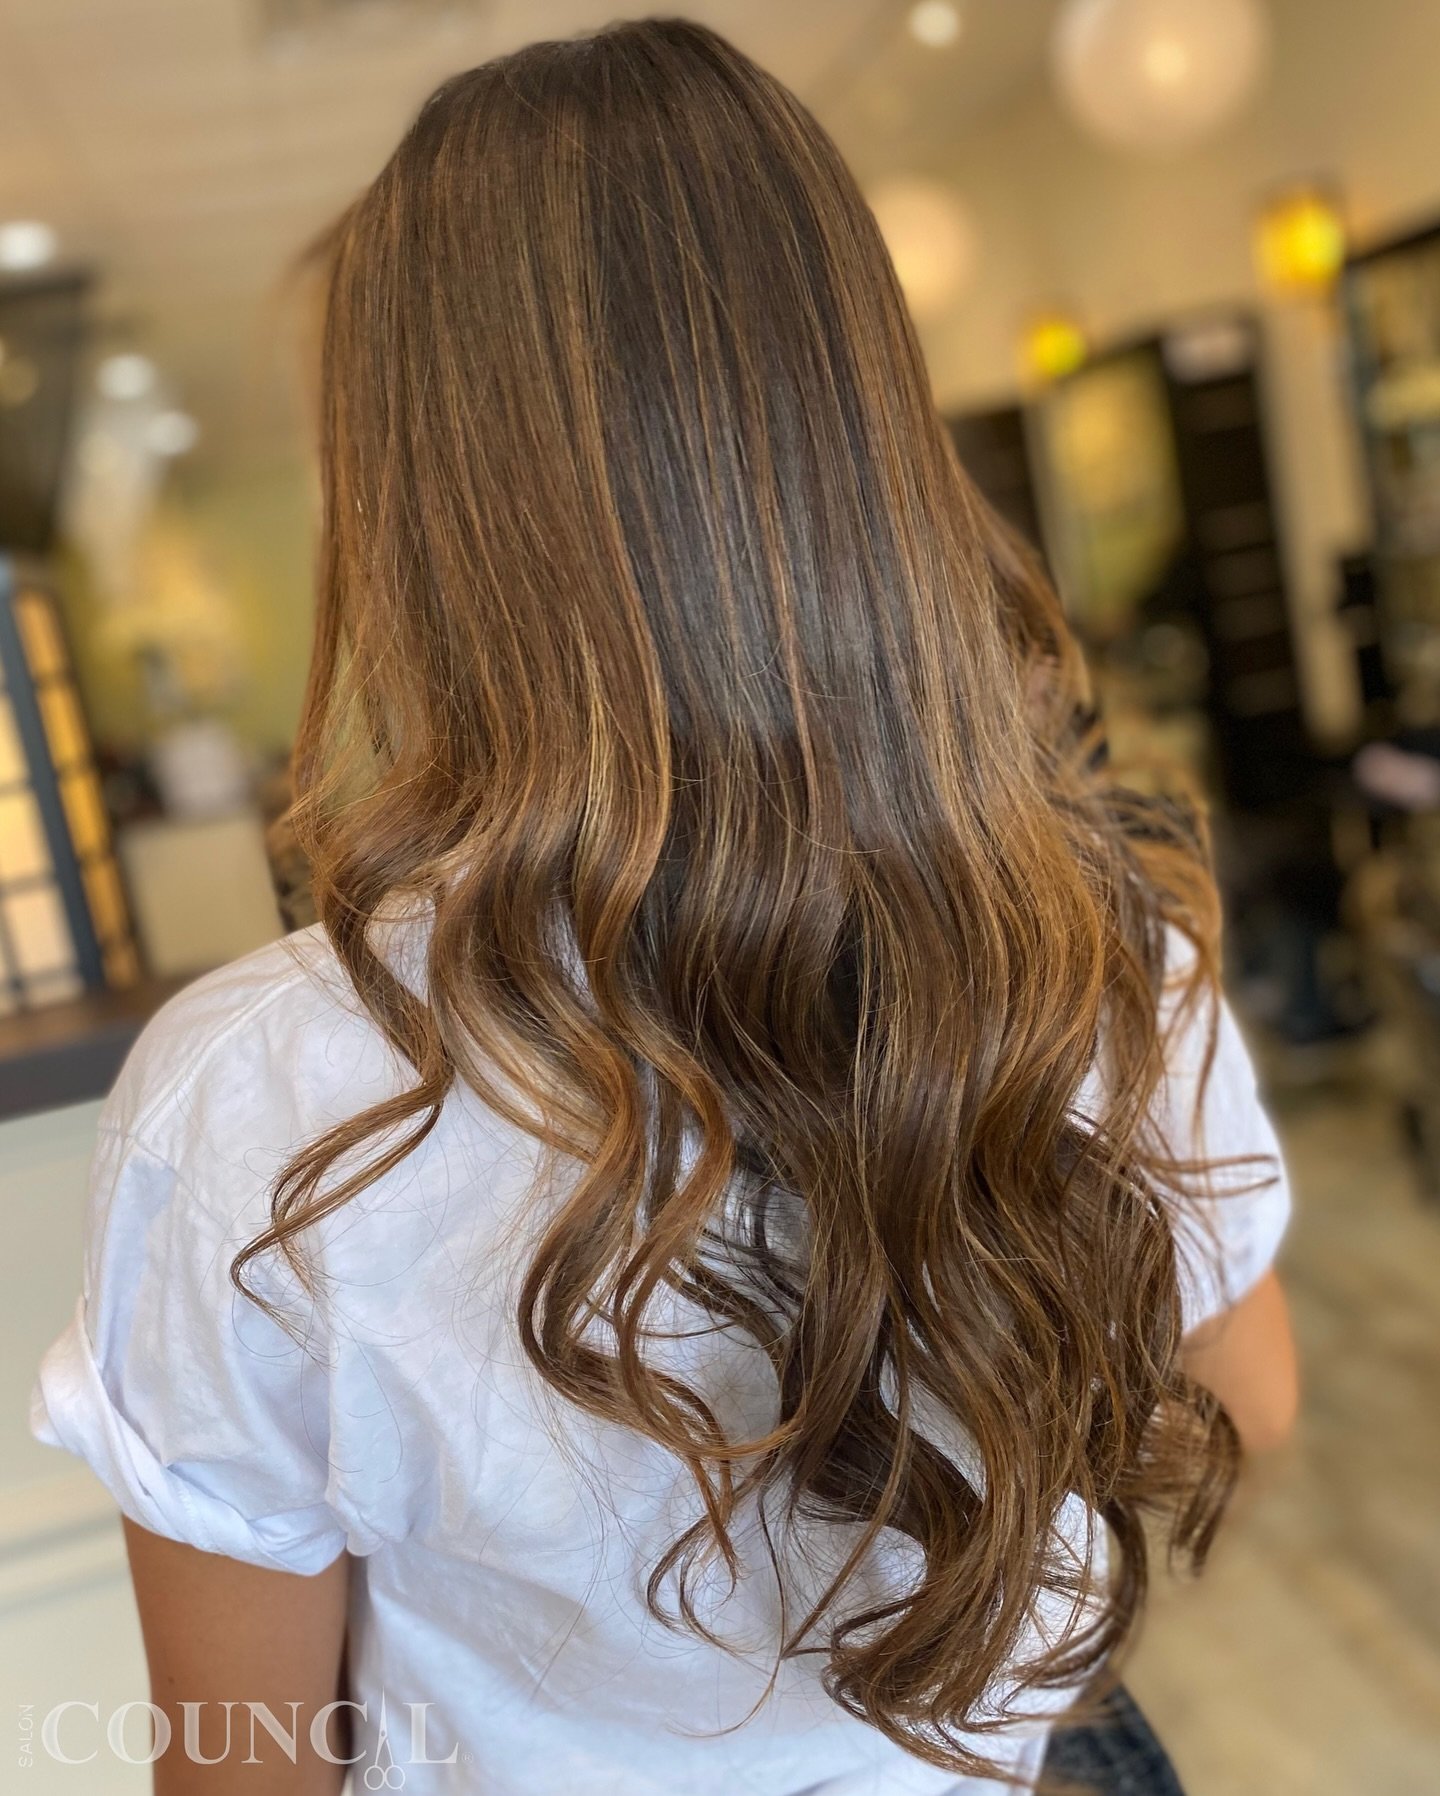 🎉#hairstyle 
Fresh wash, sleek blowout, and soft waves added with a curling iron! 🎊
Ready to dazzle with every flip of the hair! #WavesForDays #HairGoals

WASH &bull; BLOWDRY STYLE &bull; HOT IRON WAVES

Hair by TERRY @beautyby_terry 
@saloncouncil